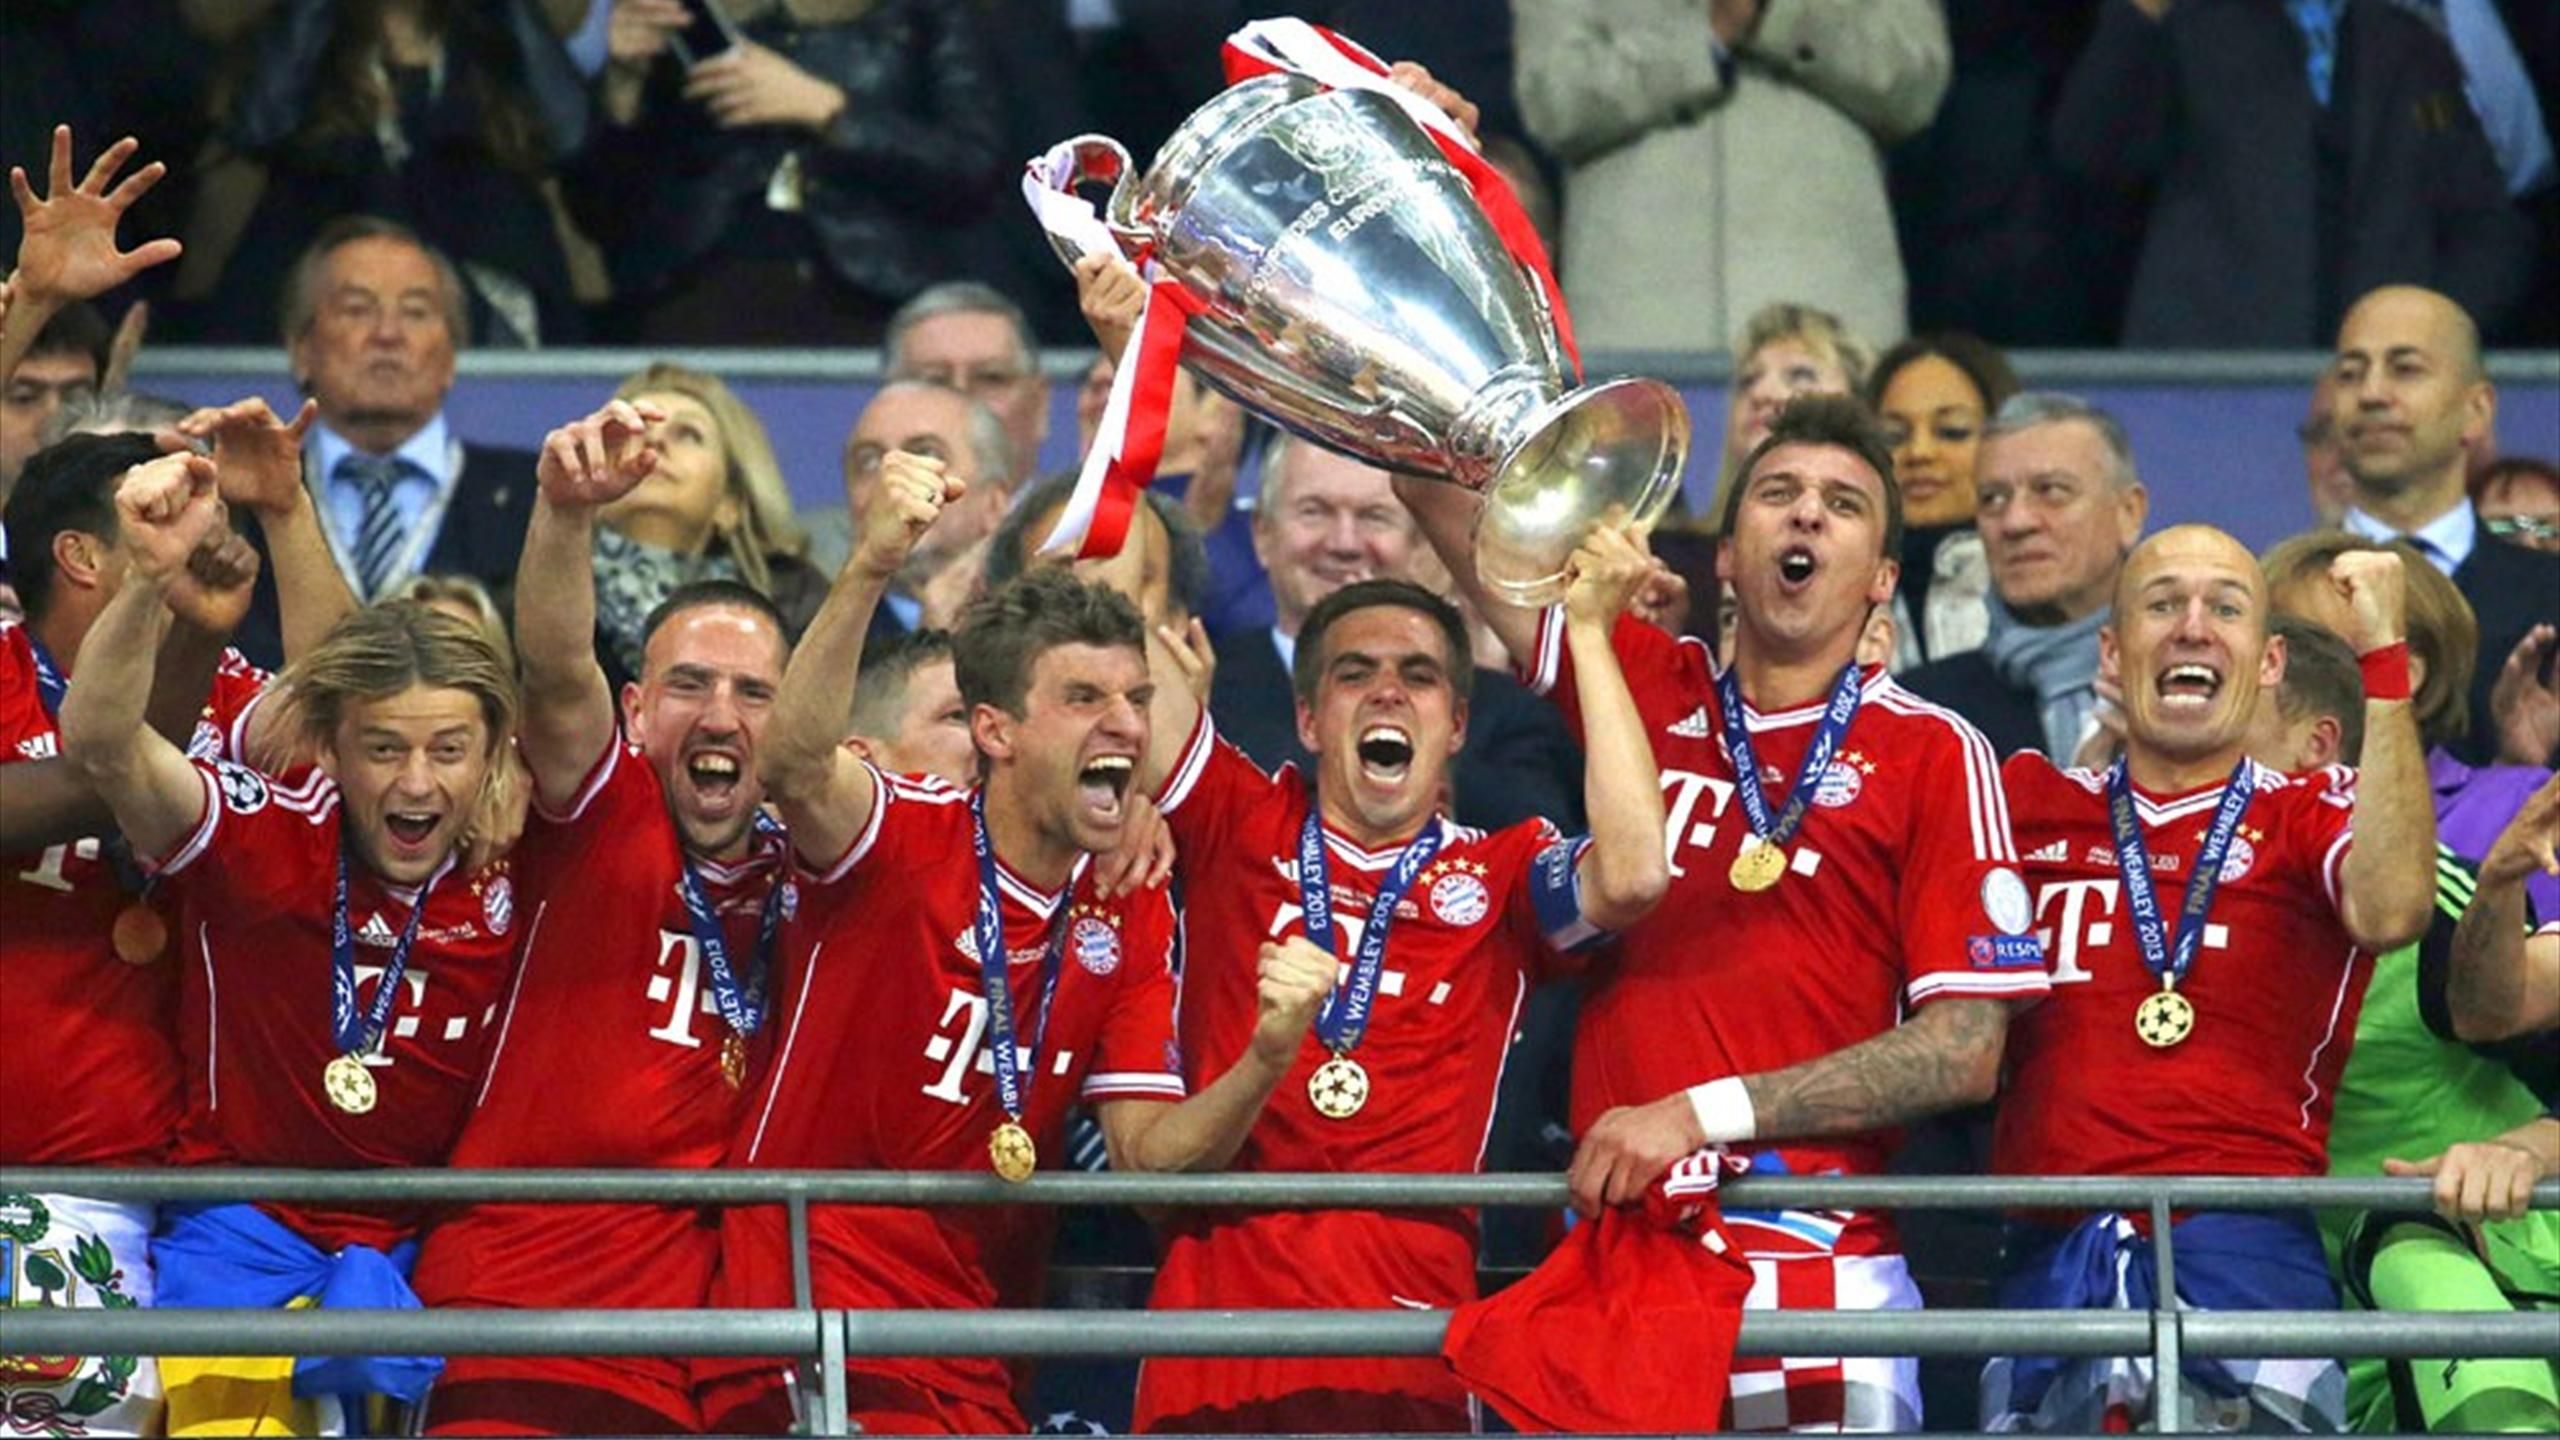 Awards for Bayern Munich's business from the season of 2011/12